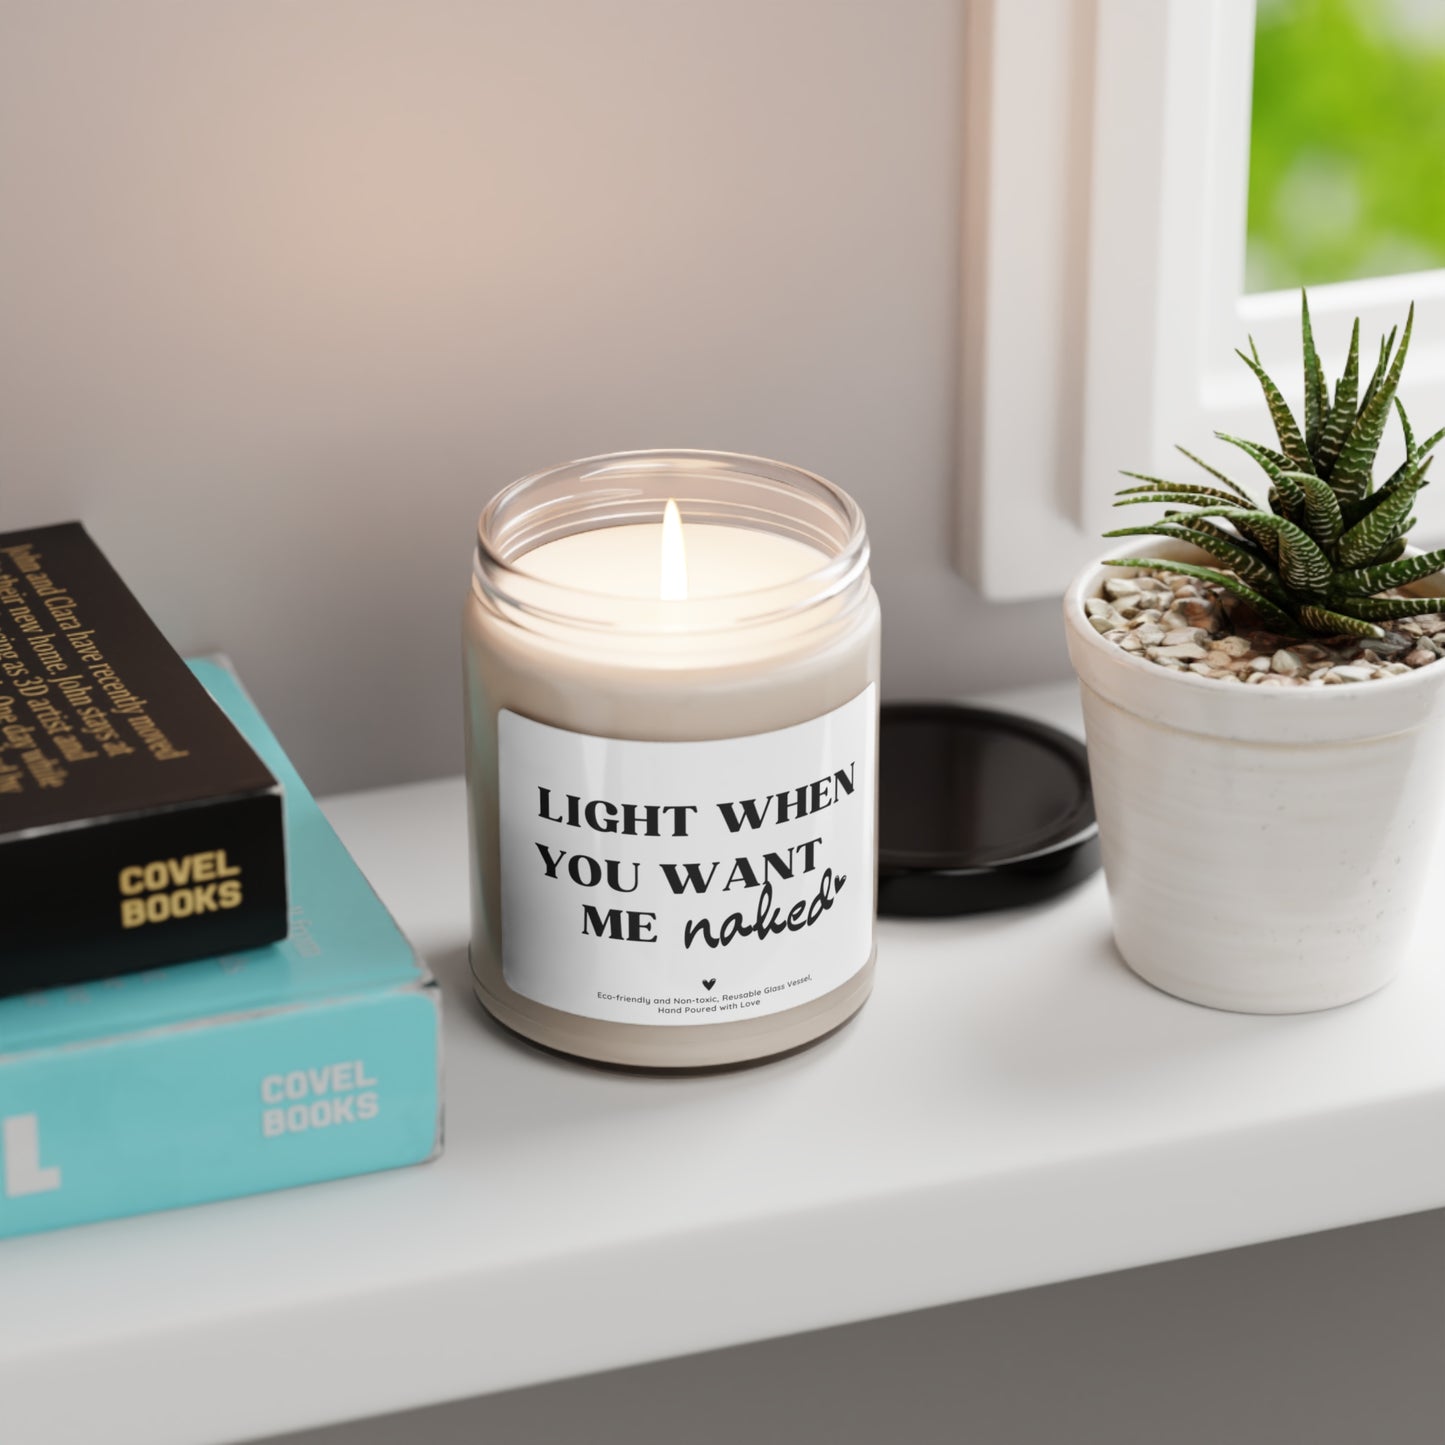 Light When You Want Me Naked Candle for Boyfriend, 9 oz